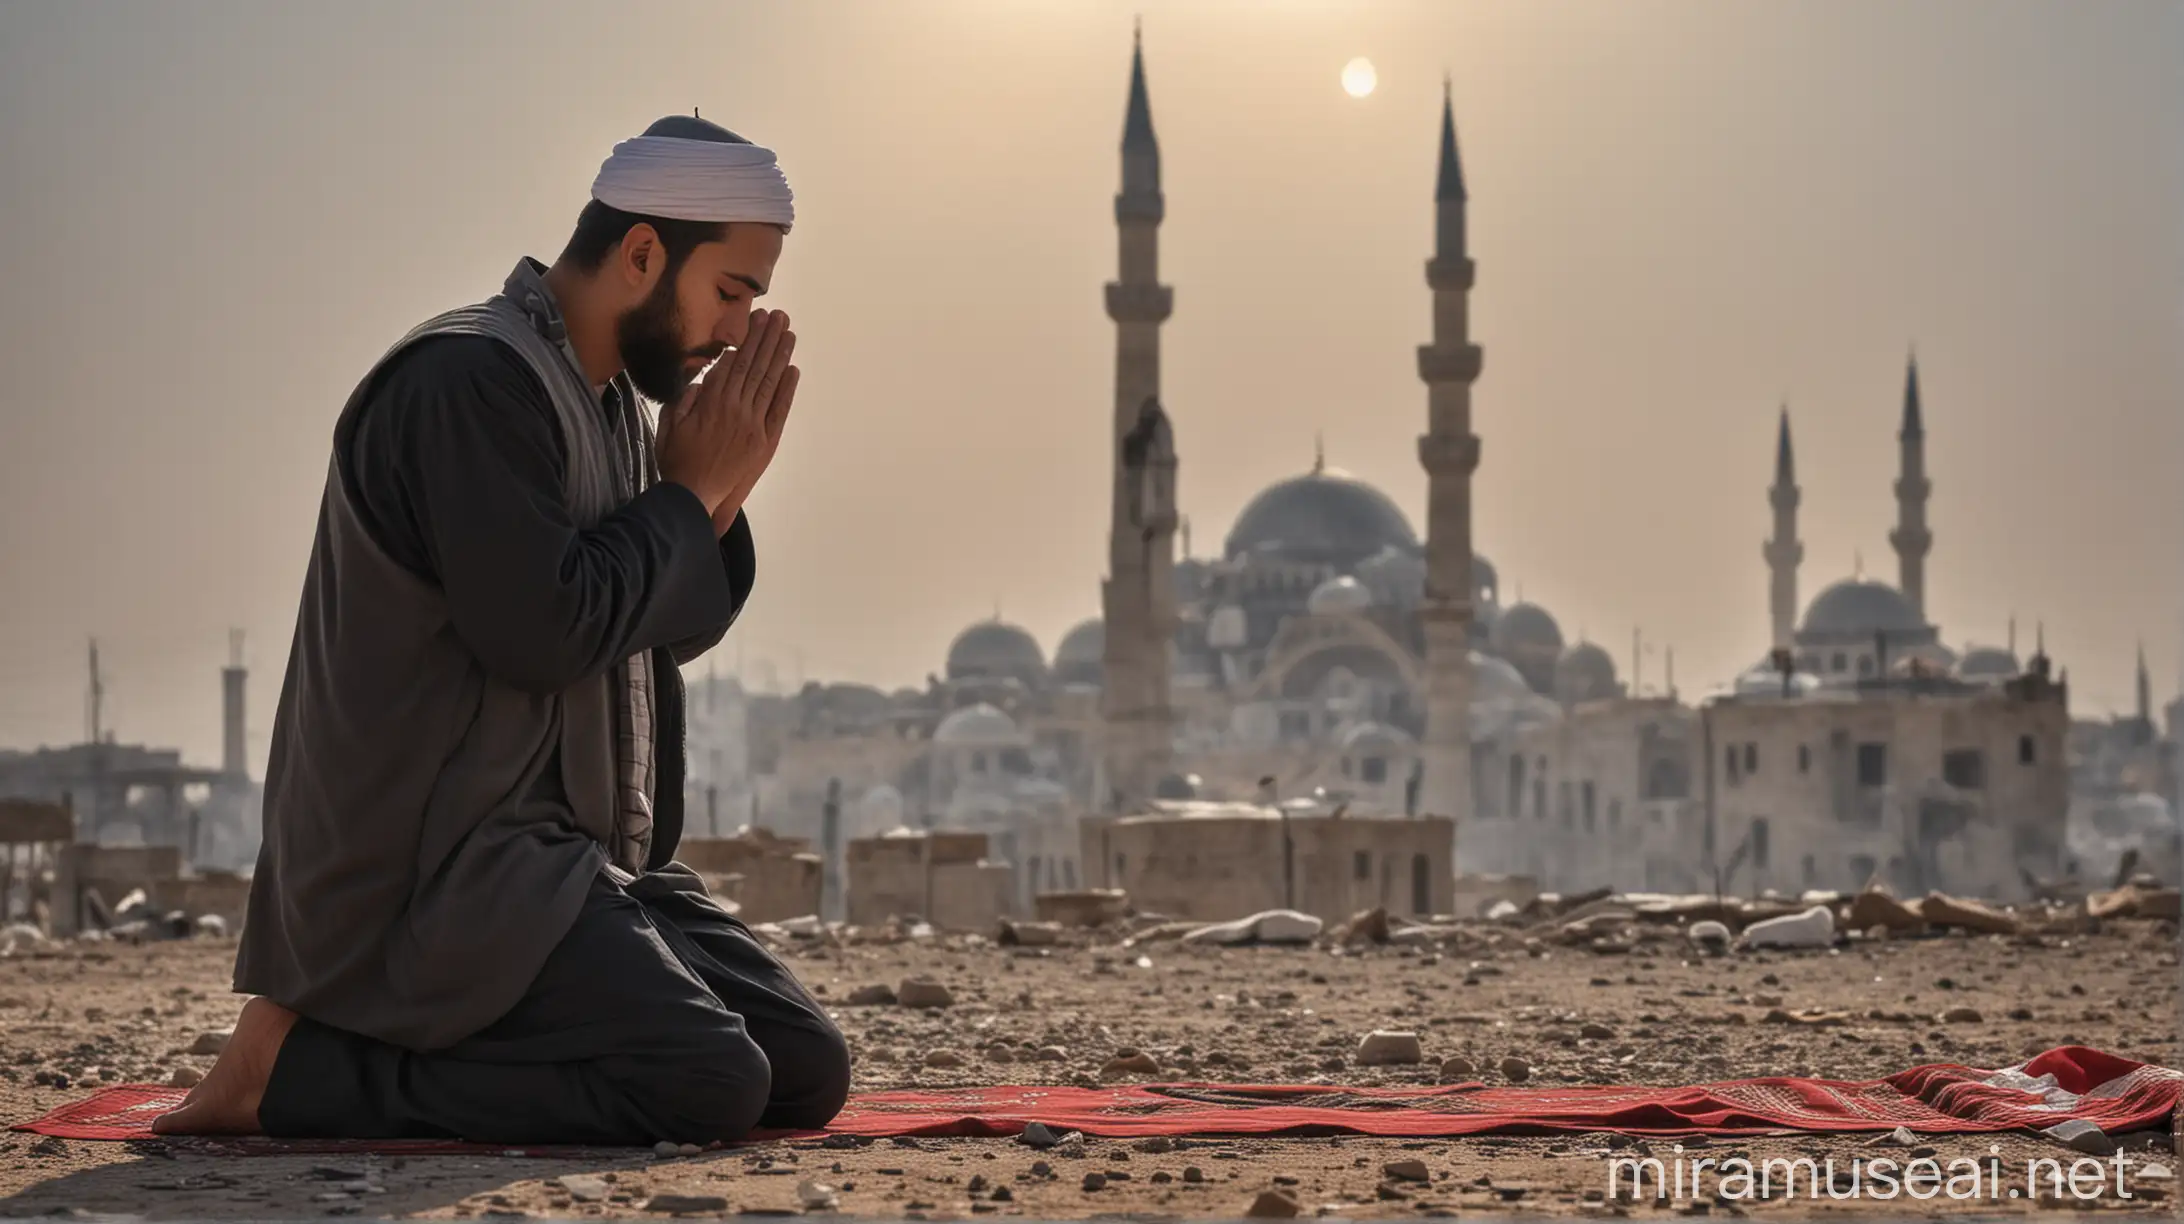 Muslim Man Praying in Morning A Solemn Moment of Devotion and Reflection